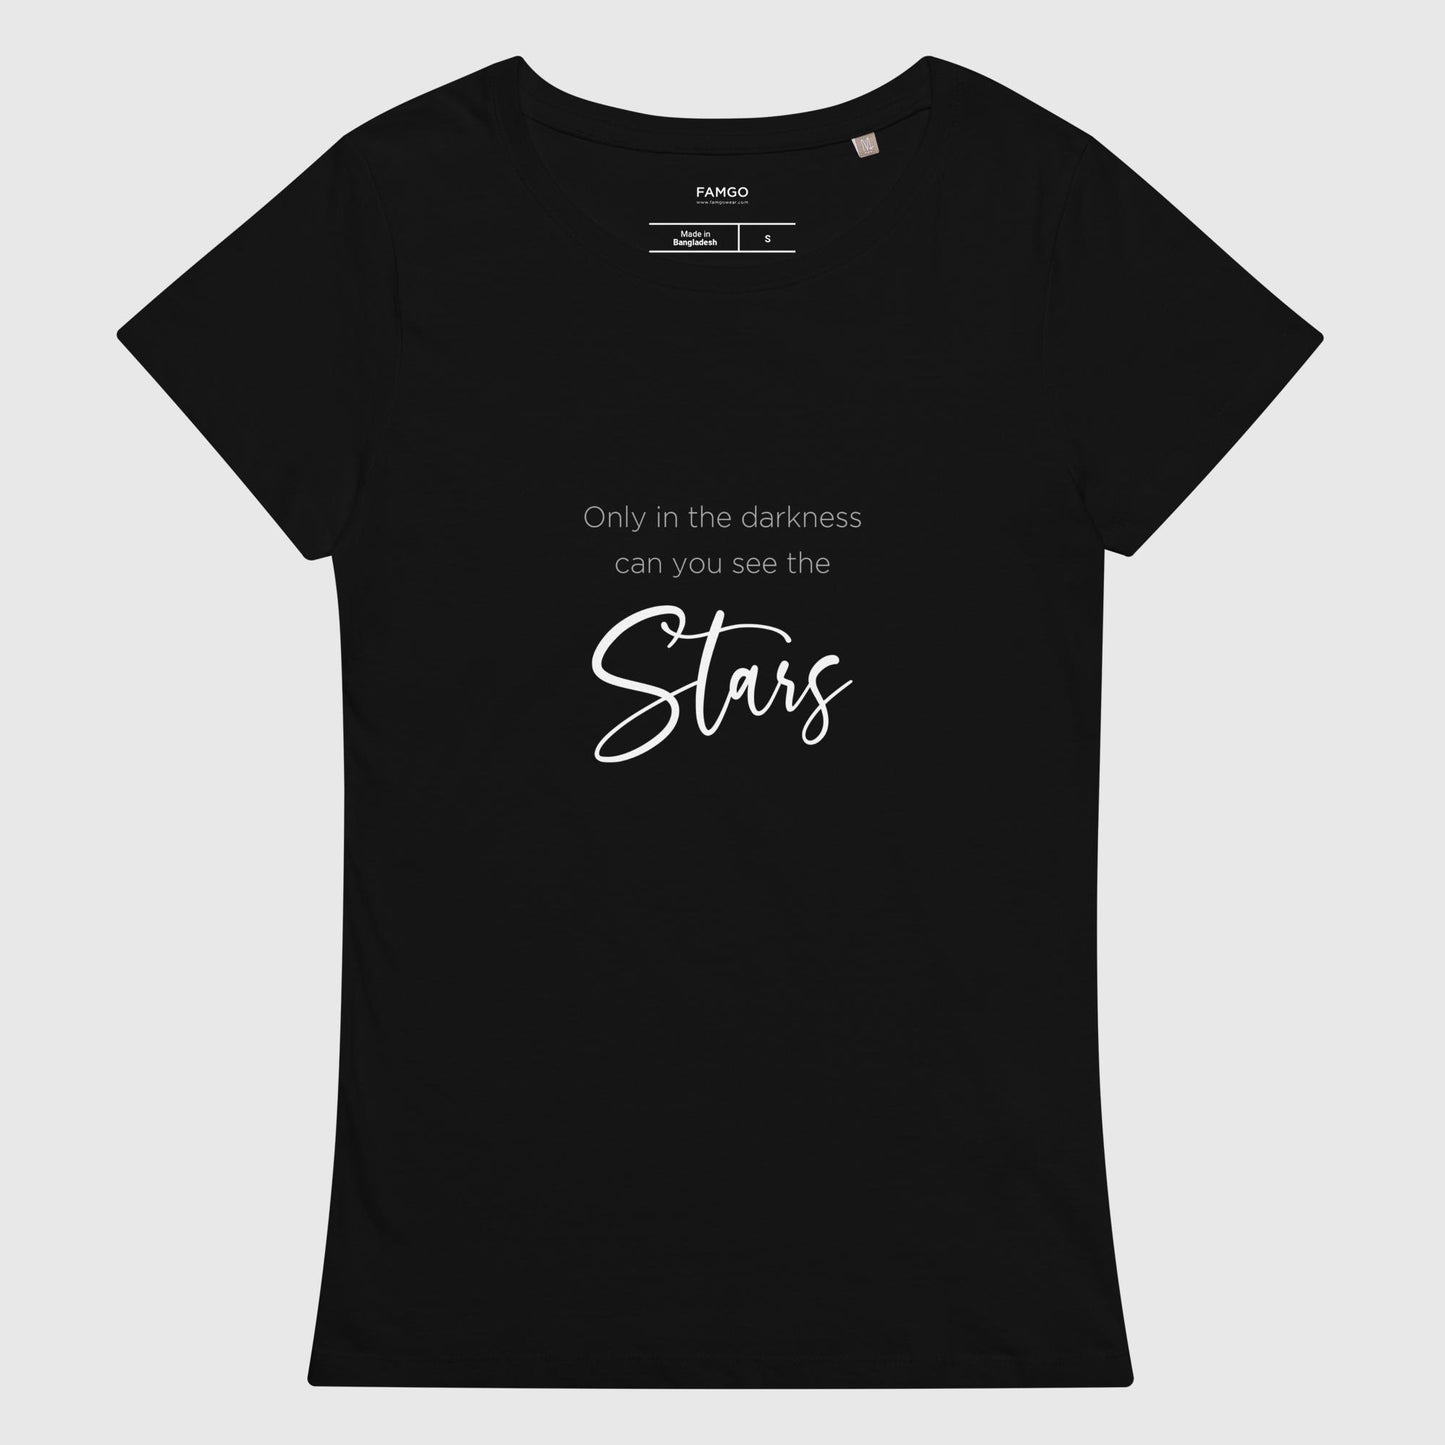 Women's black organic cotton t-shirt with Dr. Martin Luther King Jr.'s inspirational quote, "Only In The Darkness Can You See The Stars."